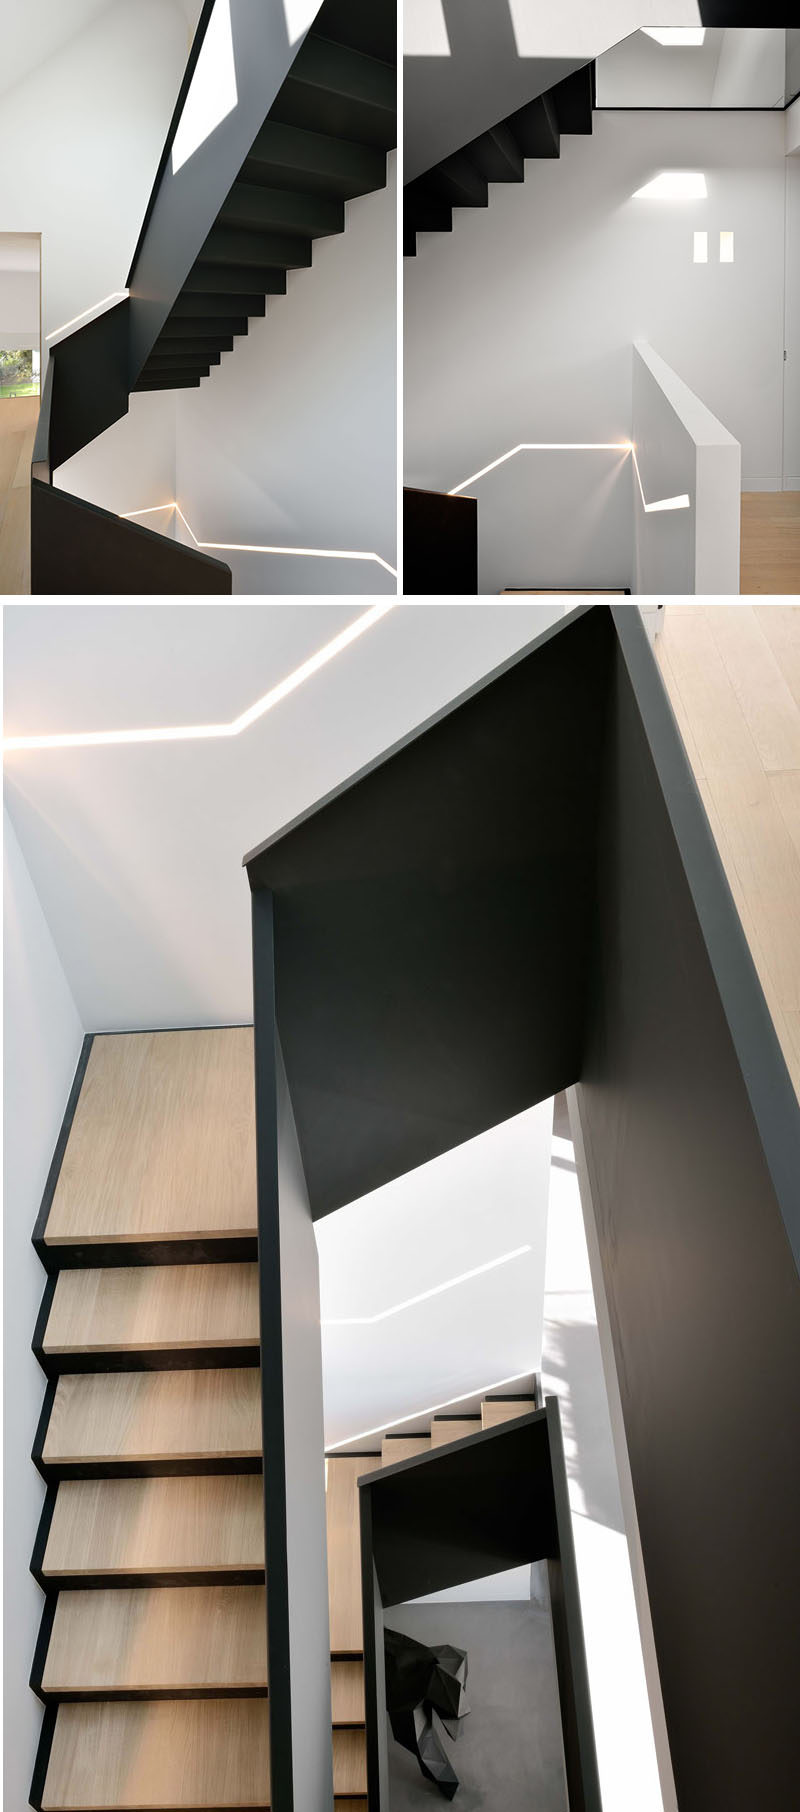 These modern black and wood stairs feature a built-in strip of hidden lighting running along side them on the wall.